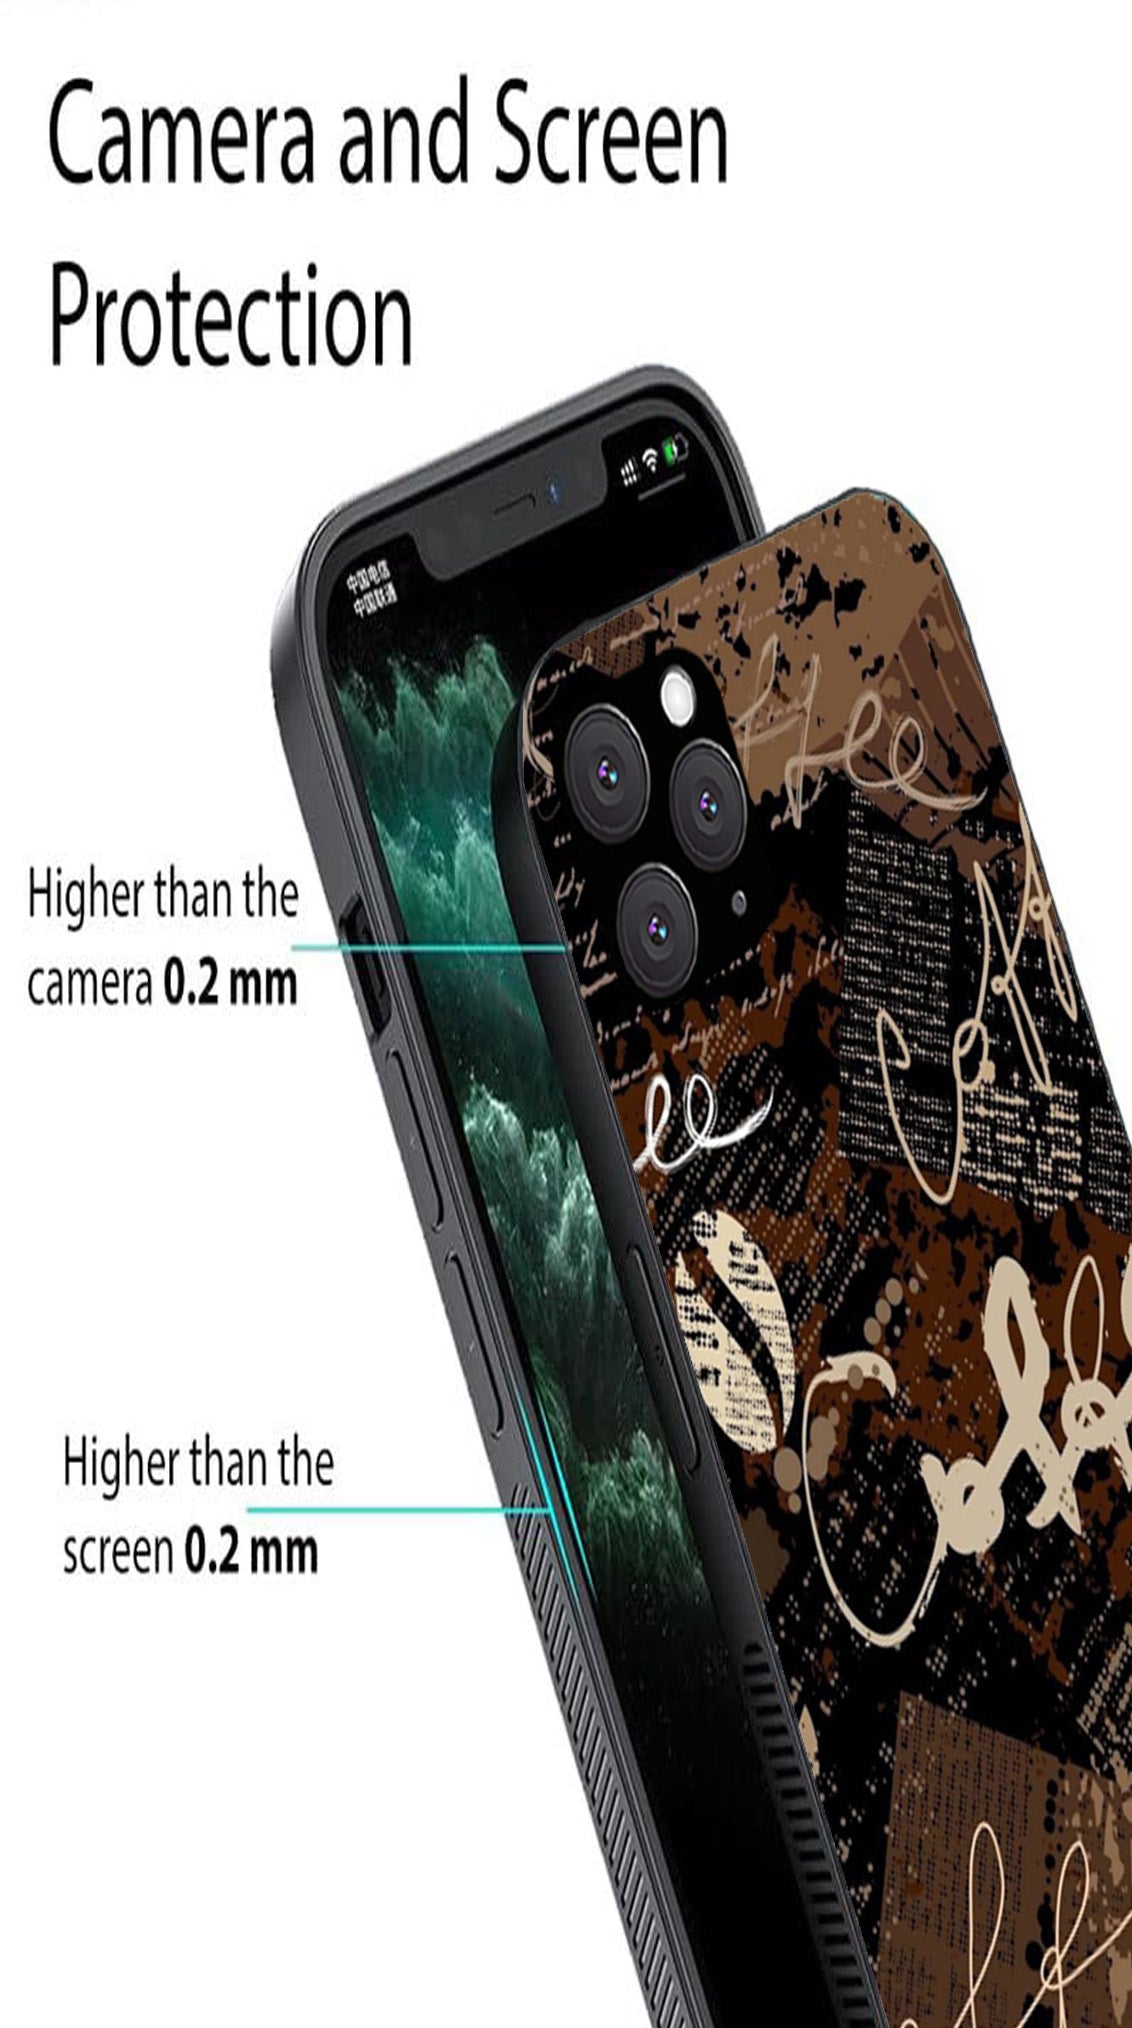 Coffee Pattern Metal Mobile Case for iPhone 11 Pro